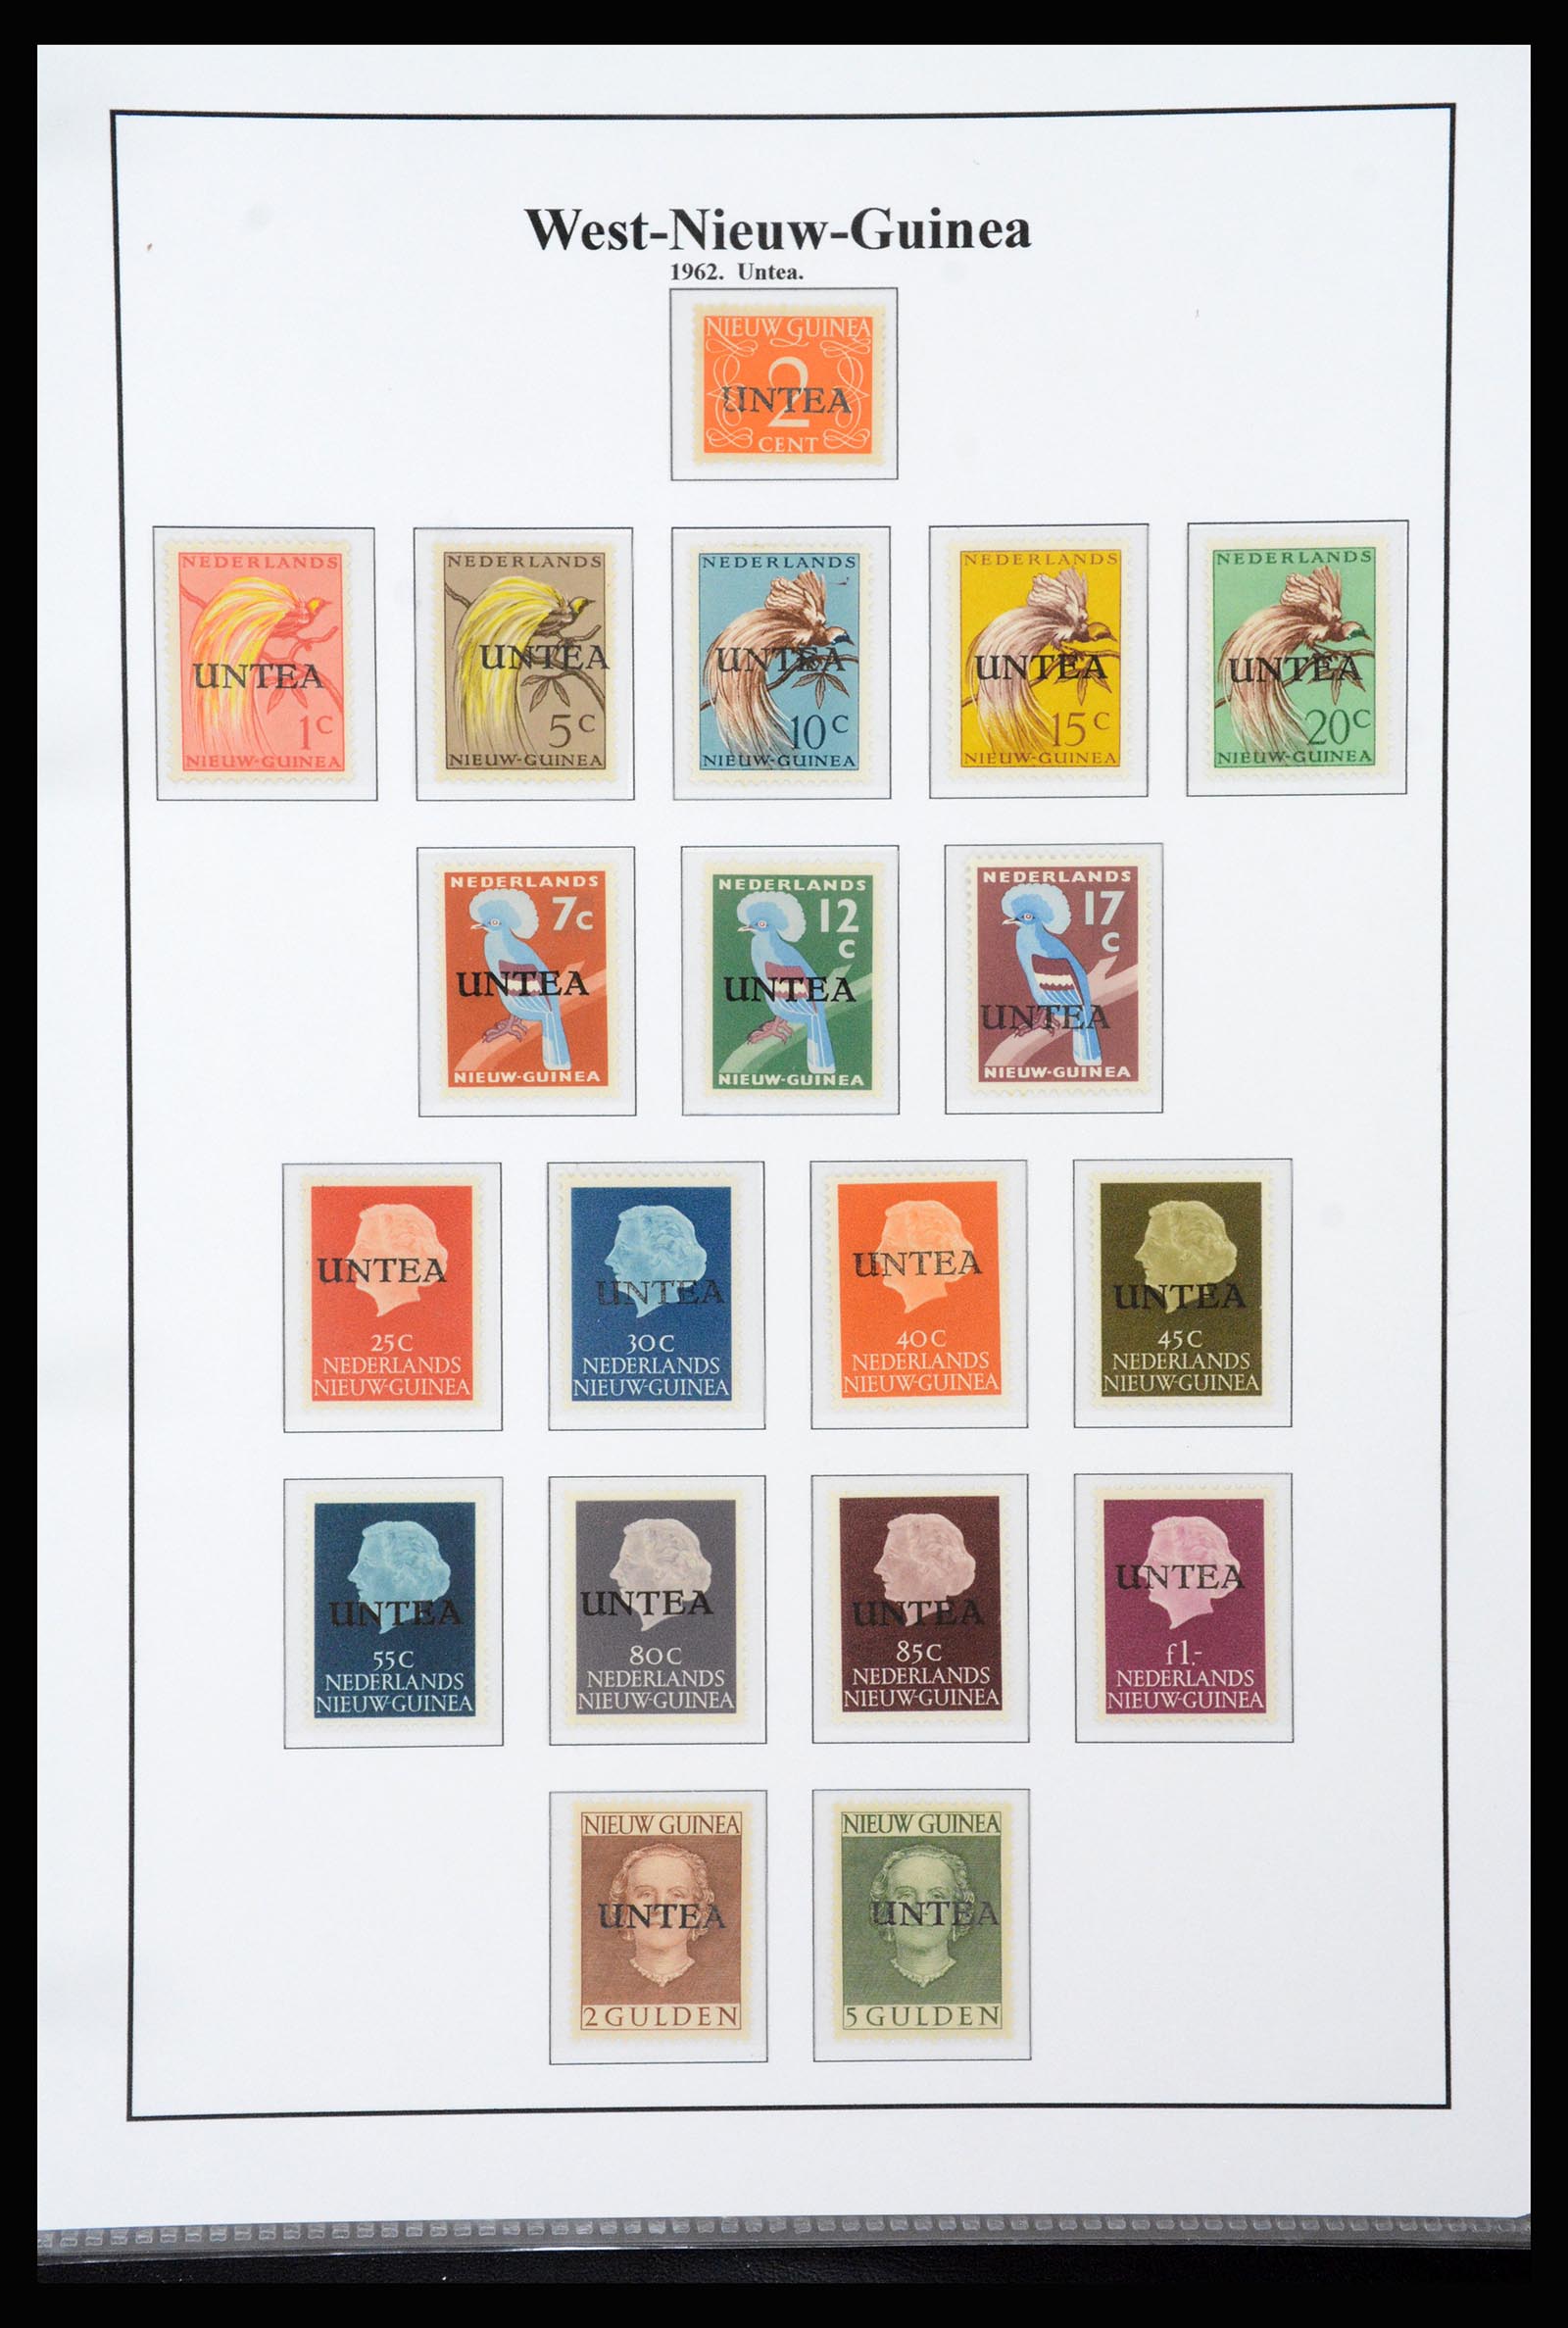 37247 045 - Stamp collection 37247 Dutch east Indies 1864-1949.